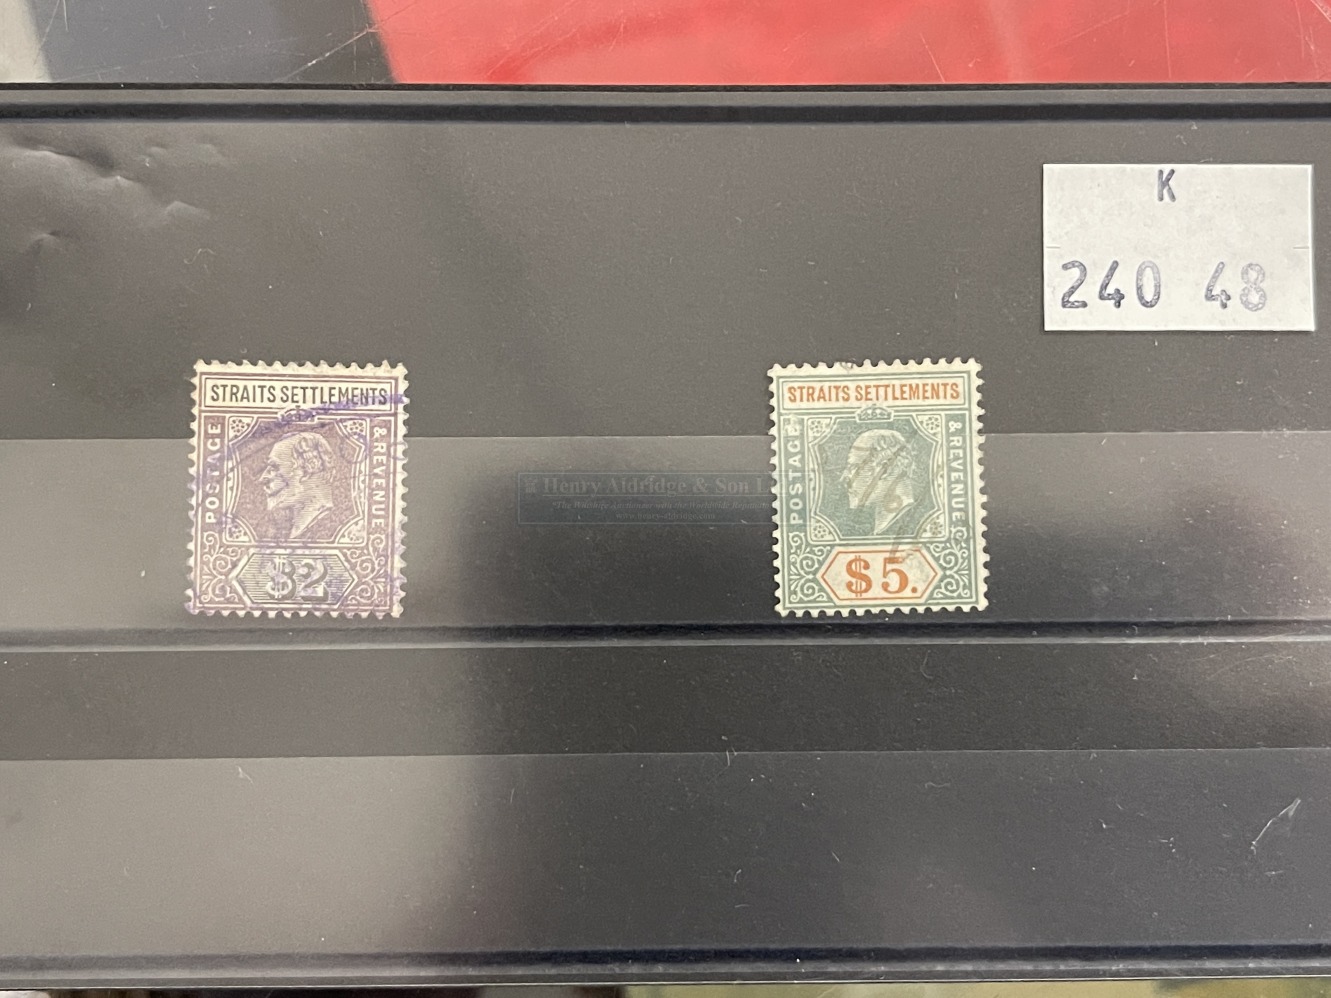 Stamps: Malaysia, Straits settlements, King Edward VII, SG120 $2 purple and black used, and